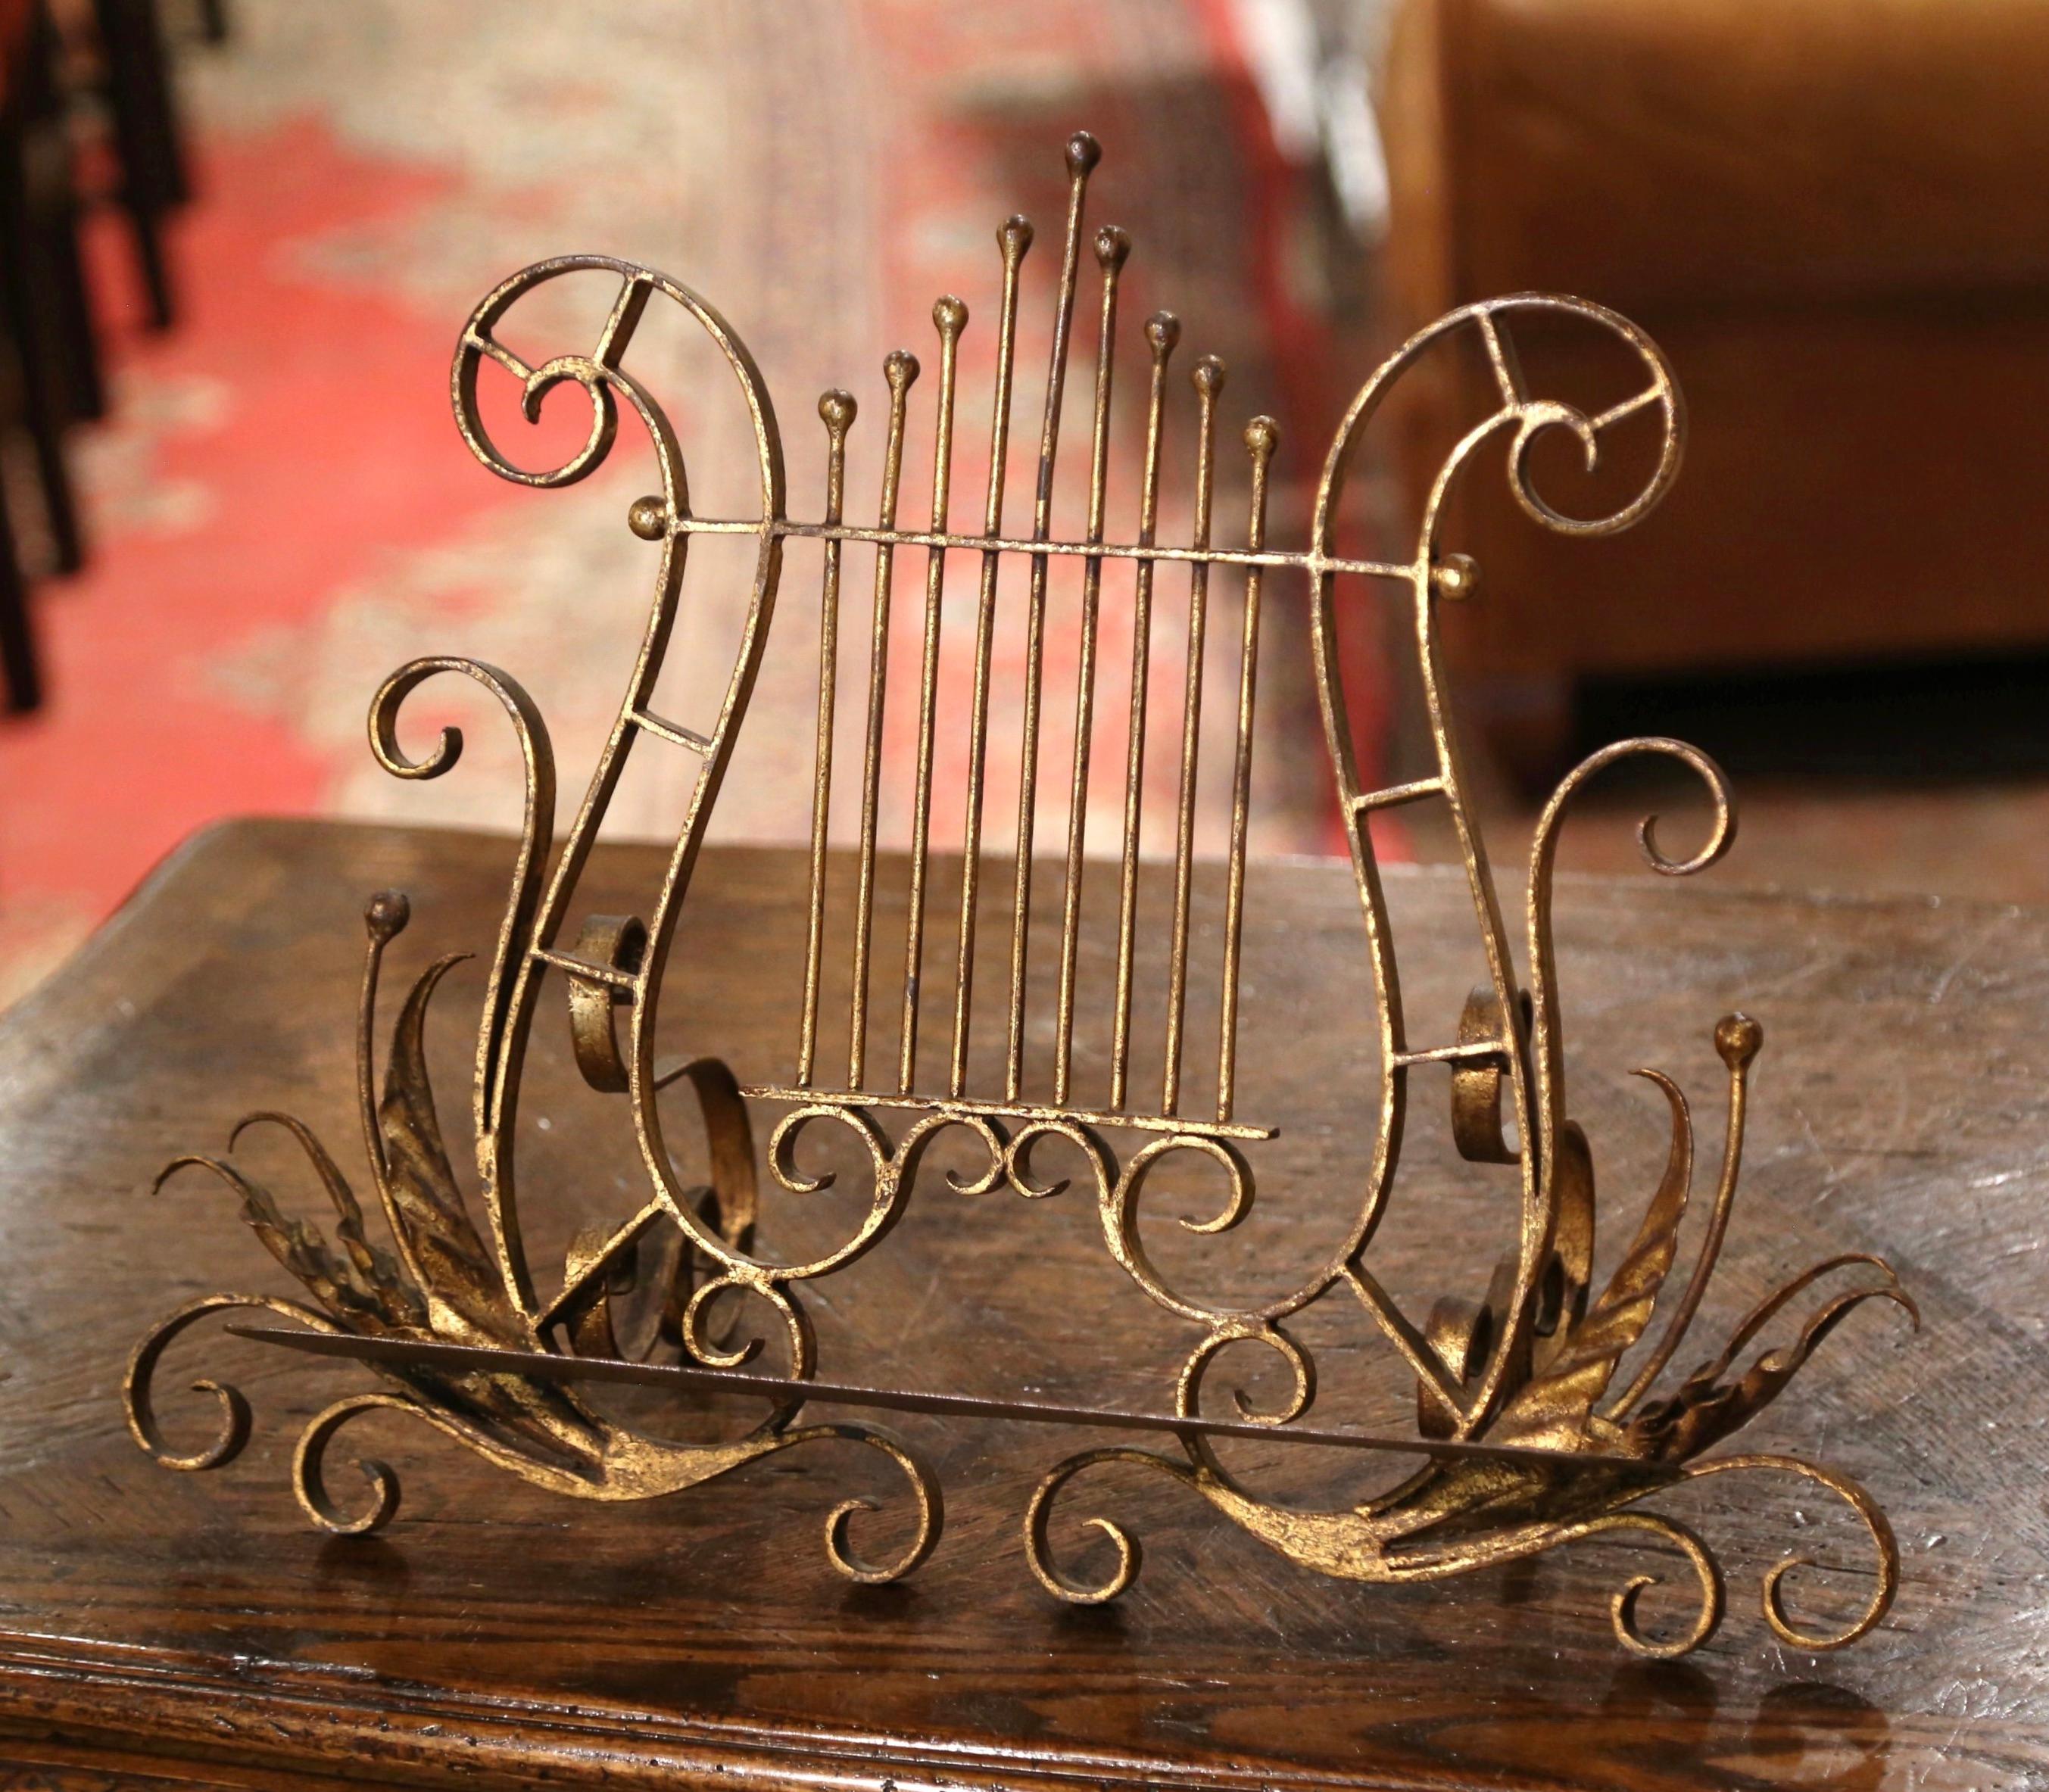 Display your Bible, music score or your favorite recipe book on this decorative, antique stand! Crafted in France circa 1920 and made of iron, the book holder sits on four small scroll feet decorated with acanthus leaf motifs. The stands features an